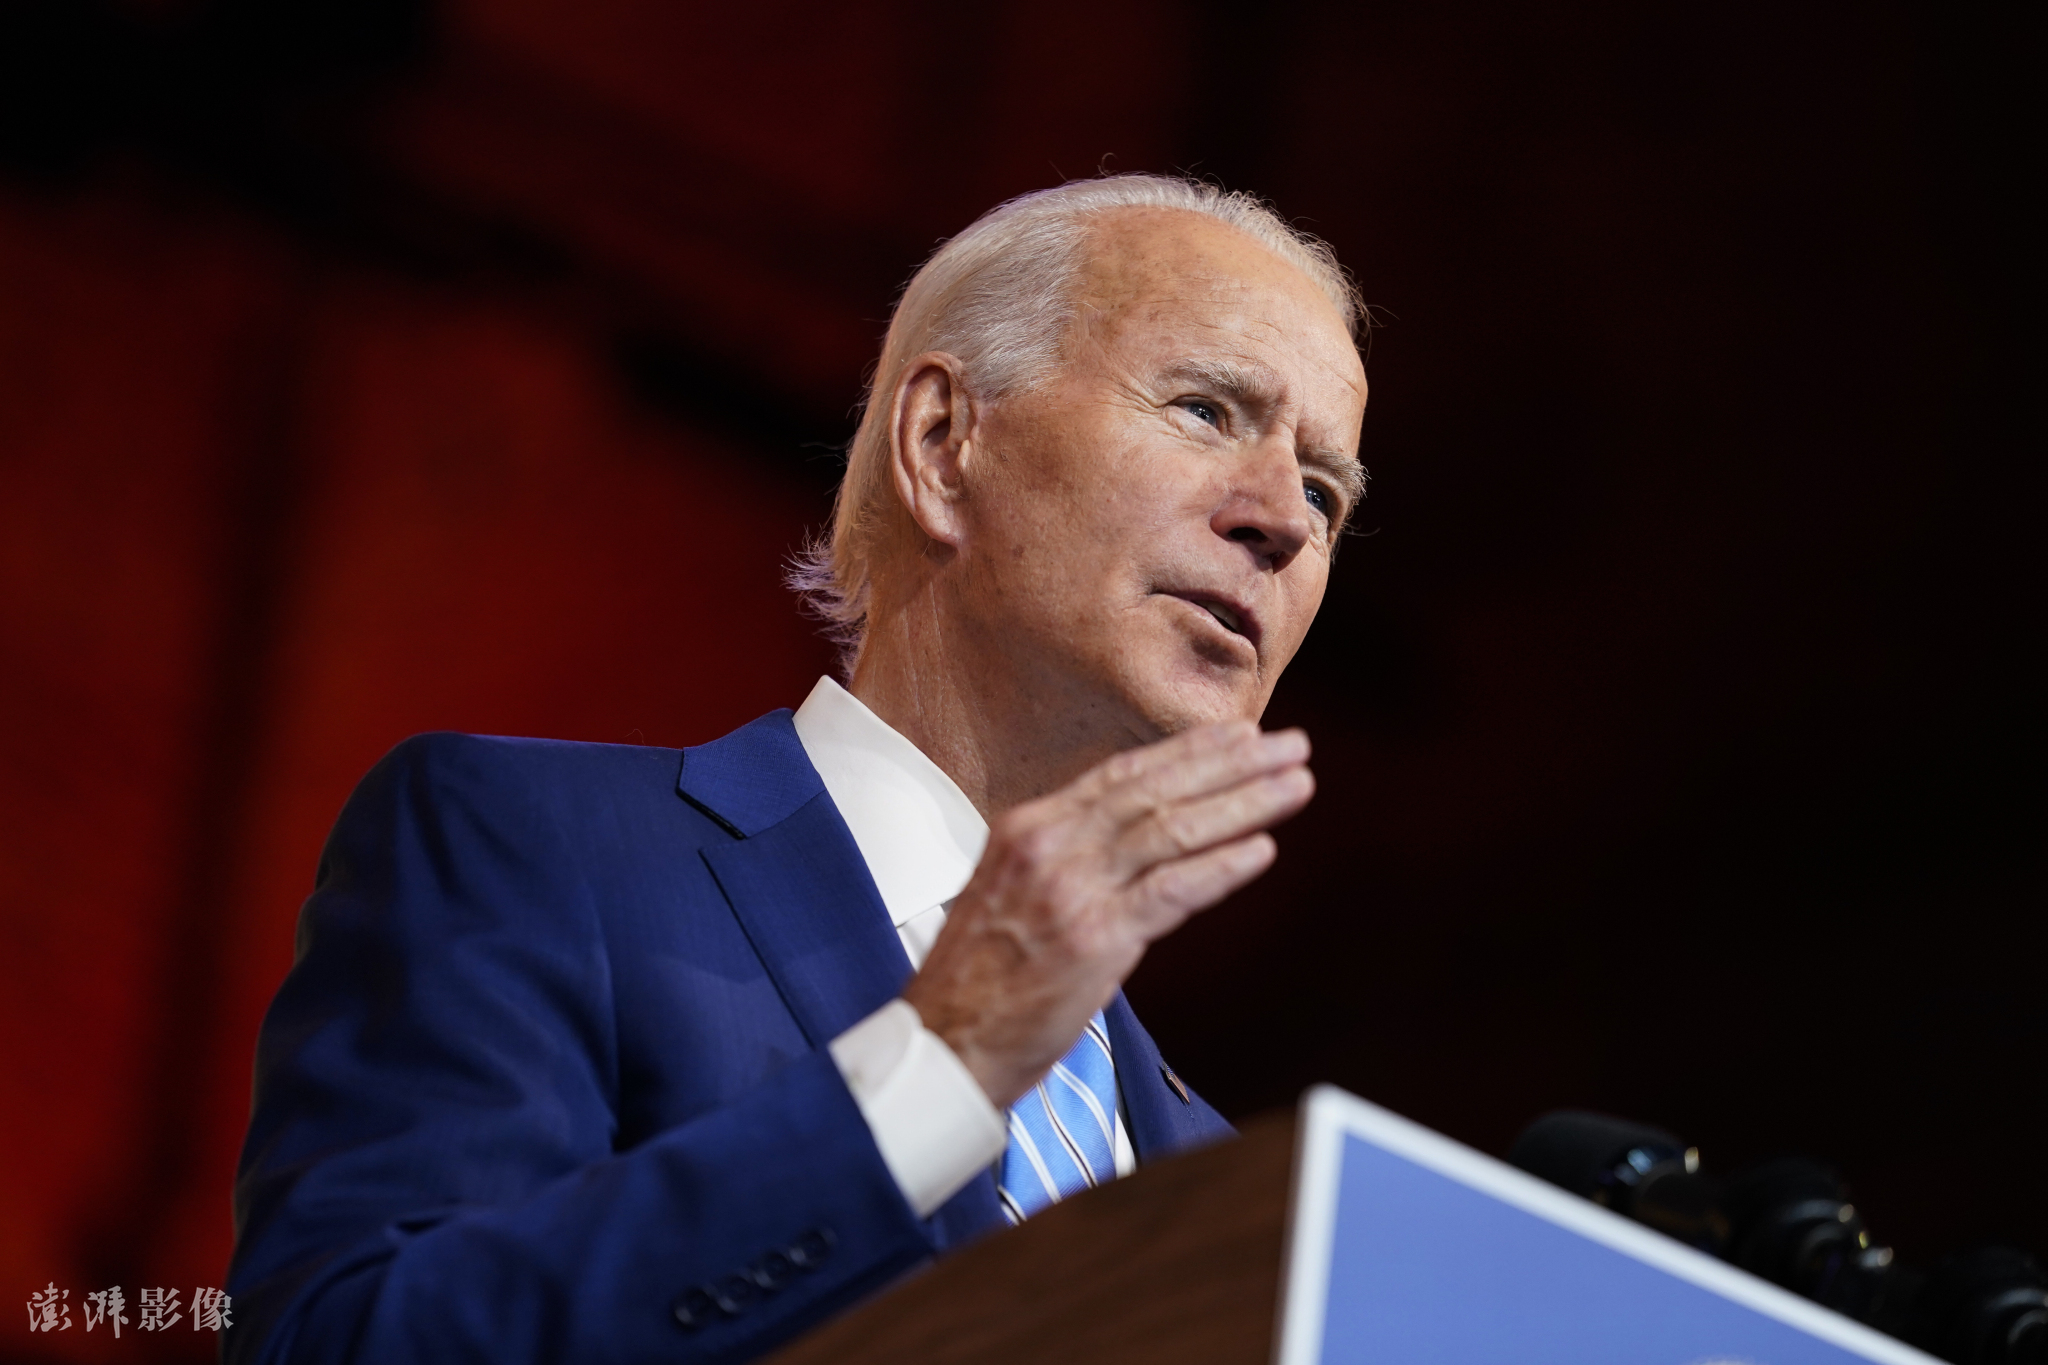 Biden on 2024 plans: "Our intention is to run again"